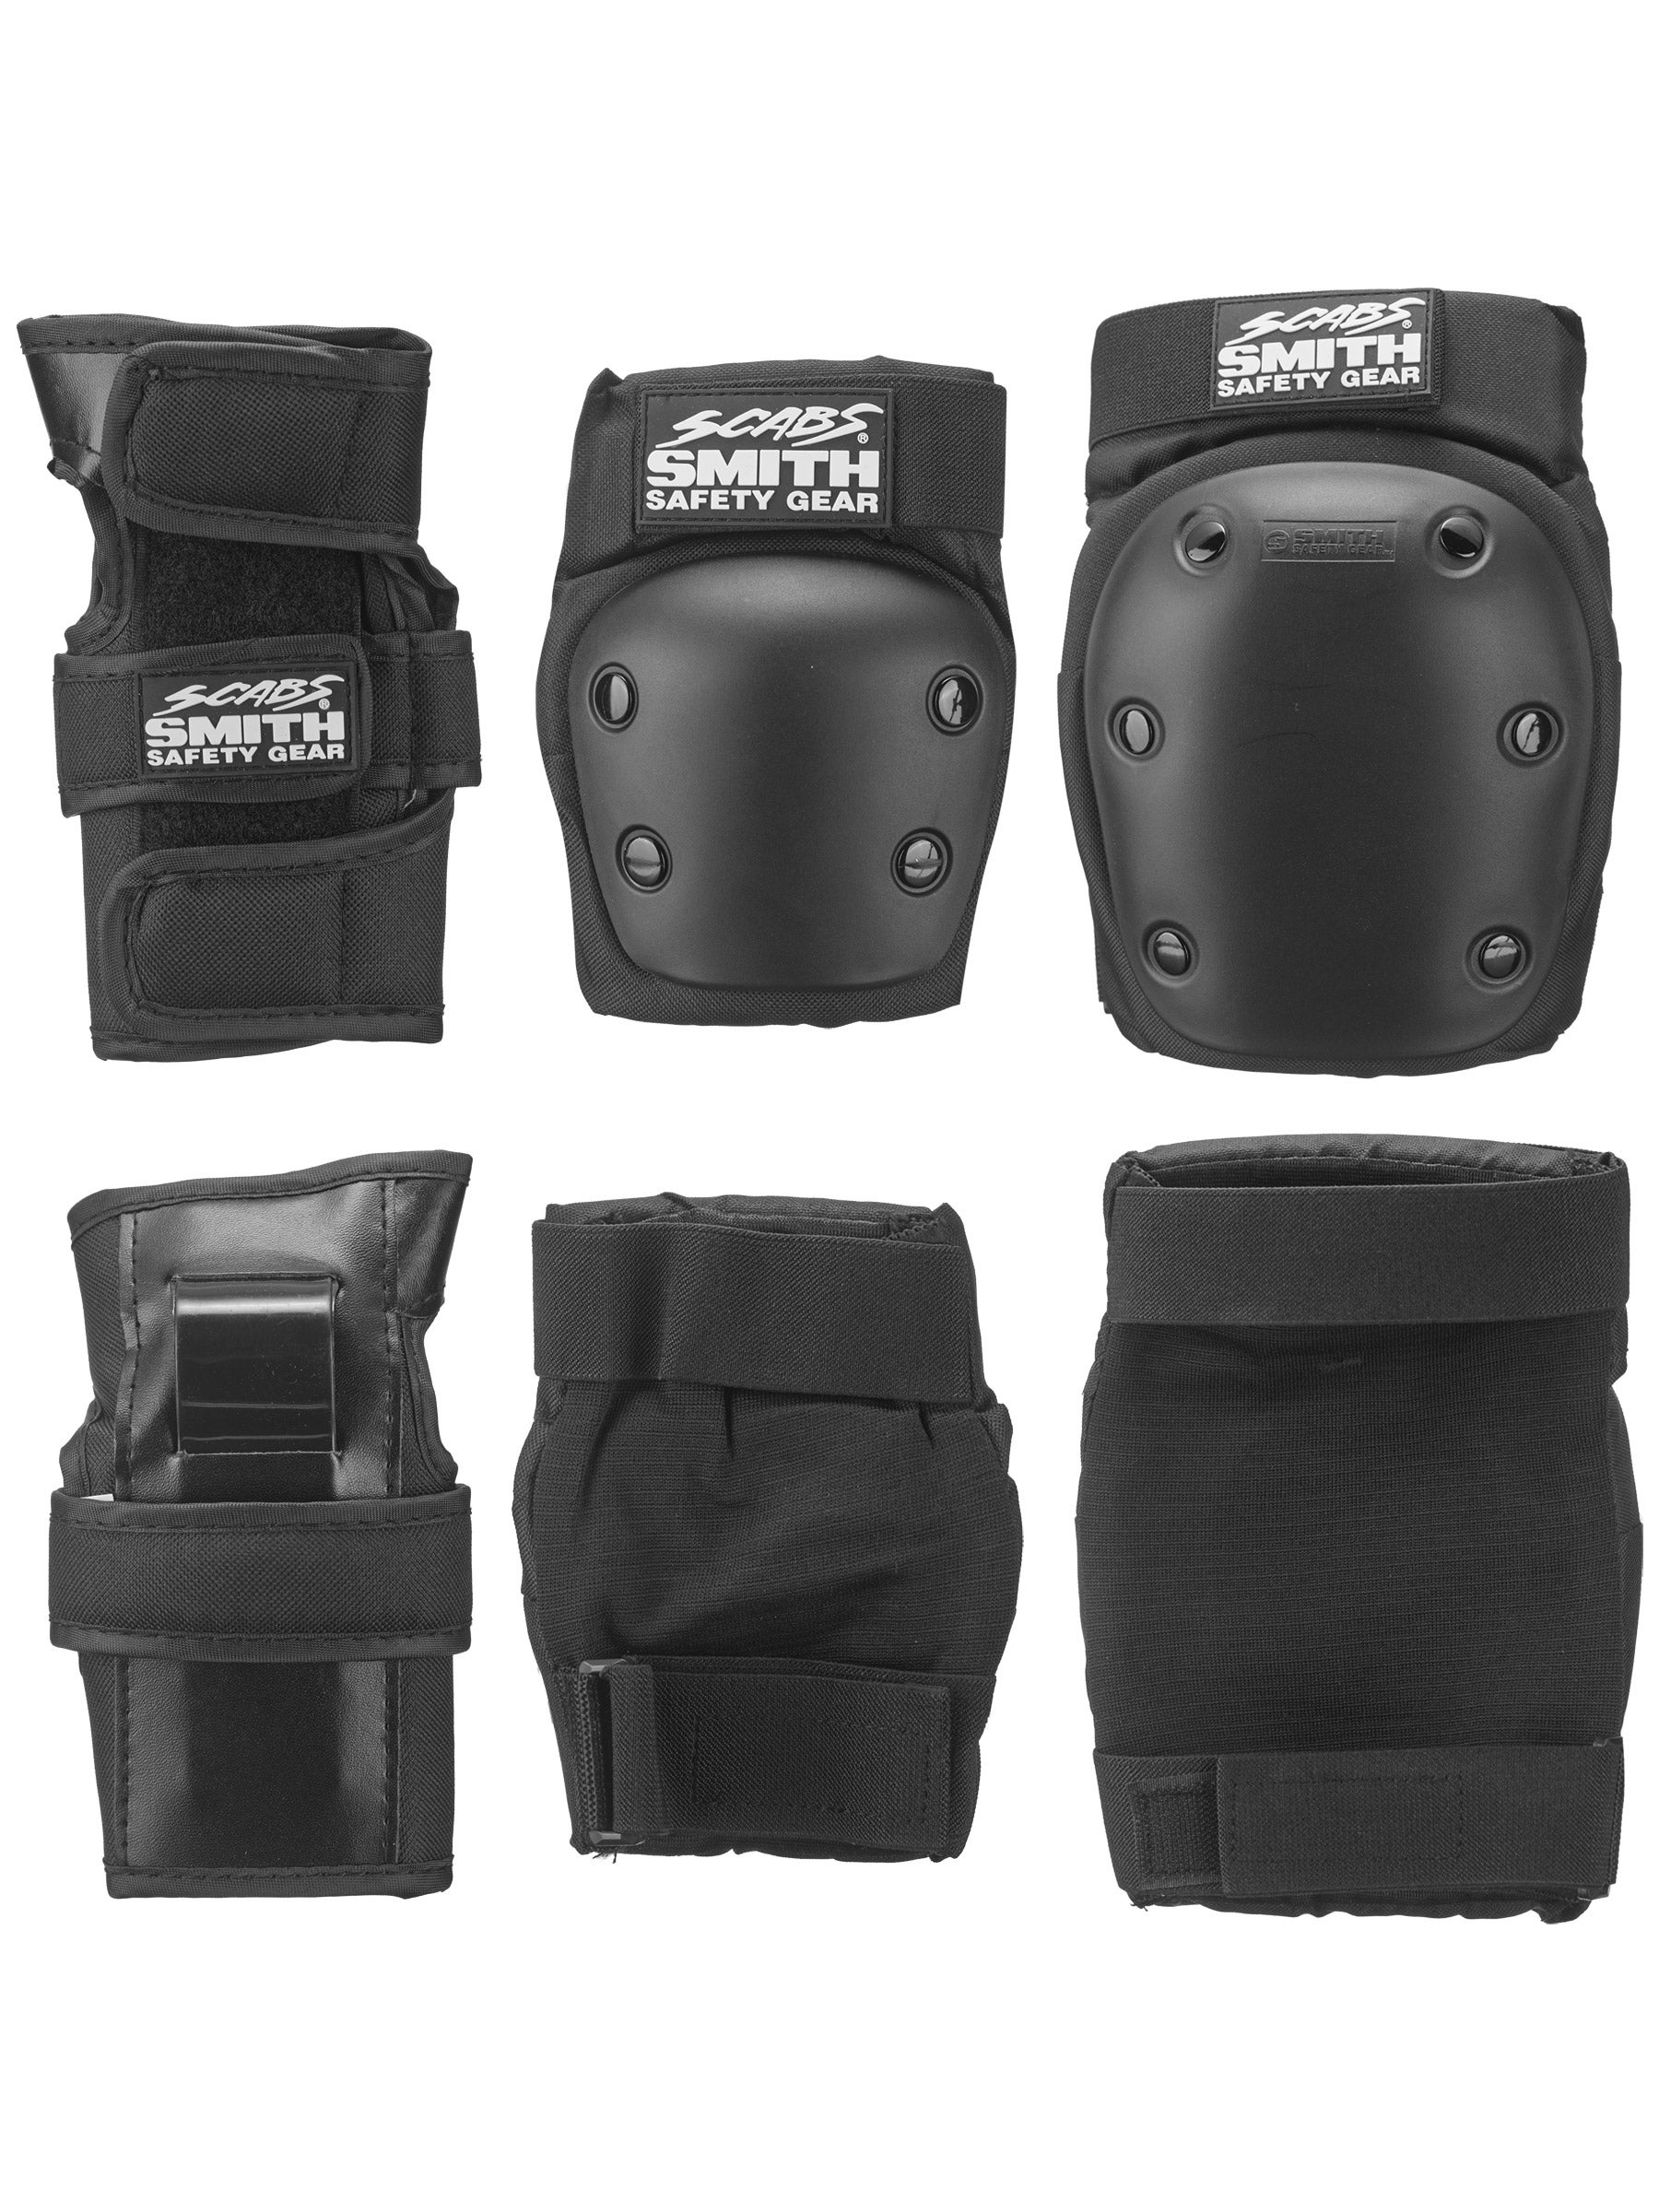 Smith Scabs Pads Skateboard Wrist Guards BLACK SMALL 